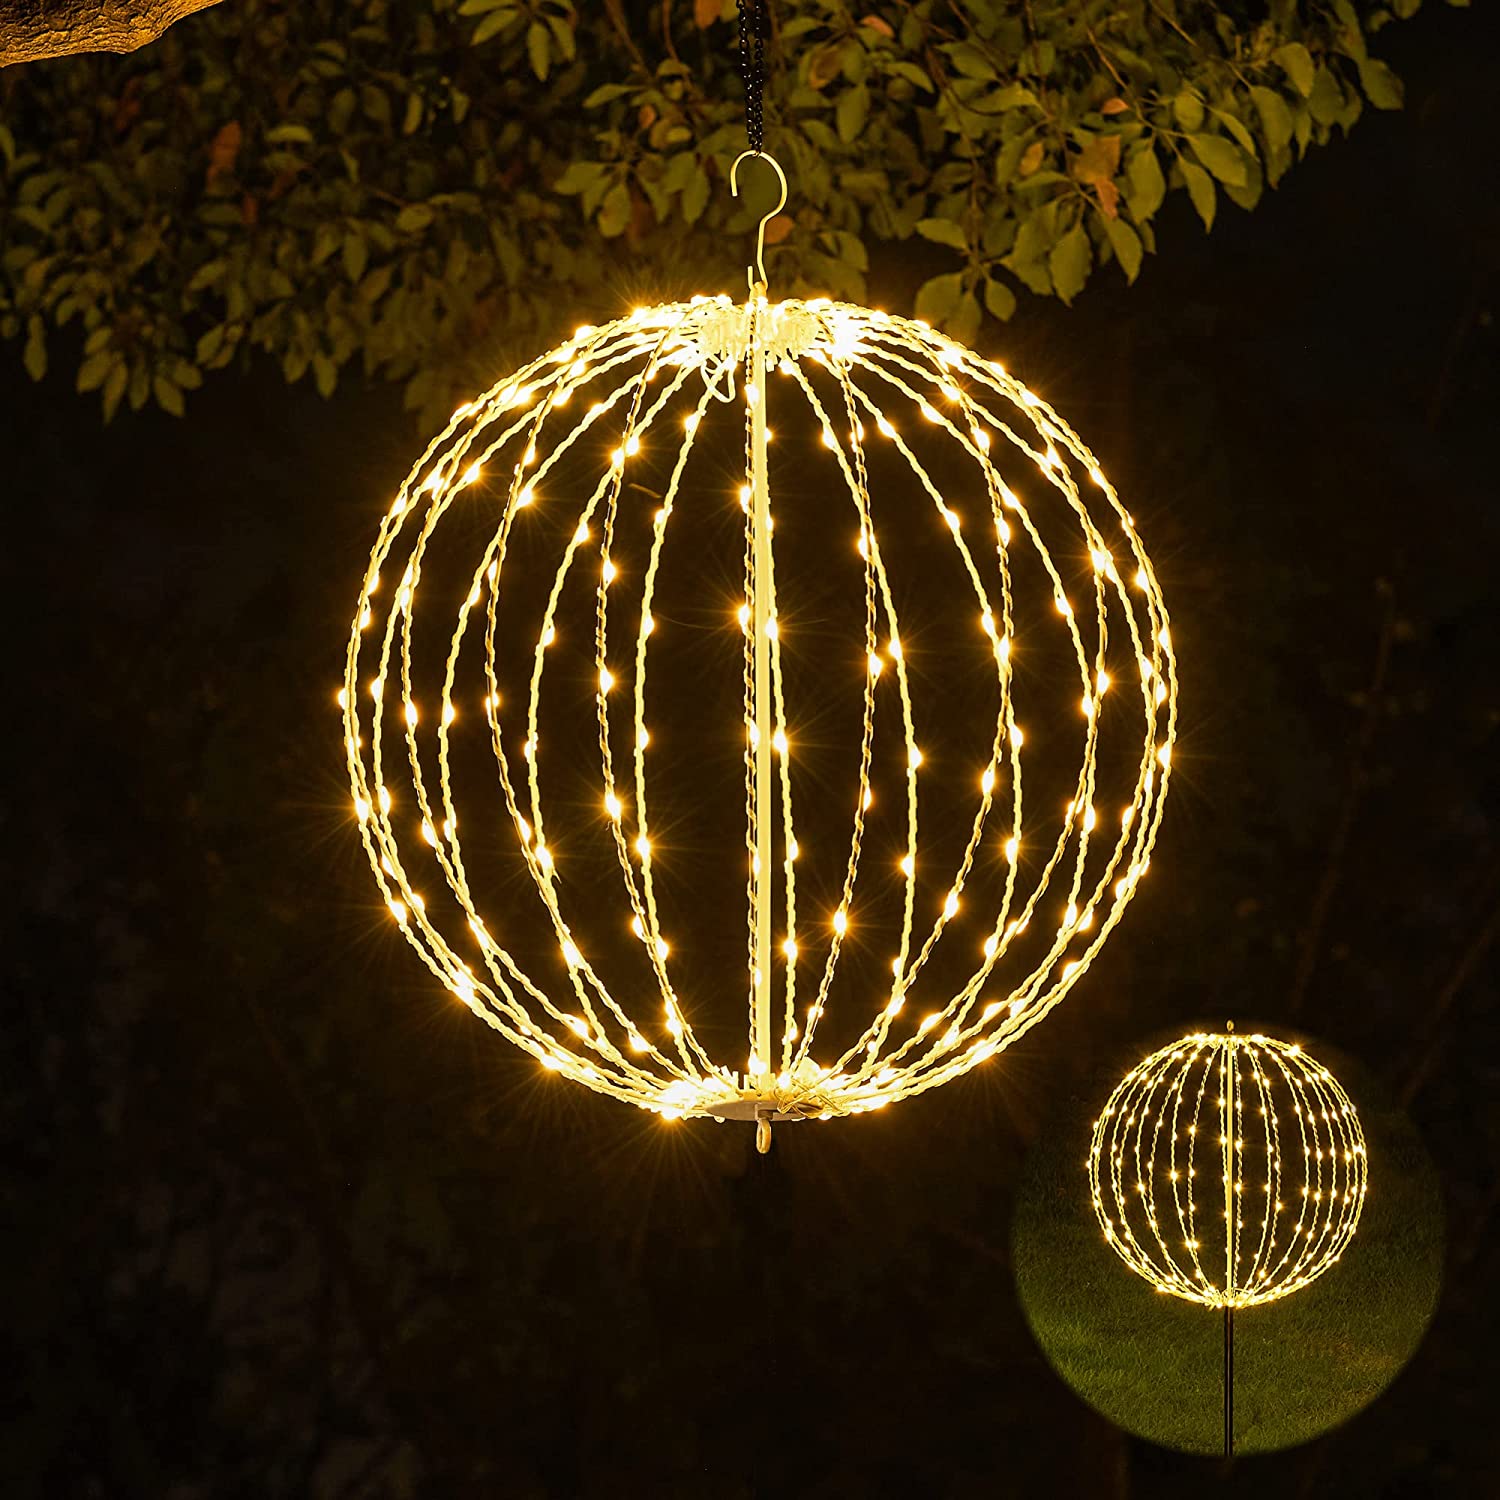 20IN 200LED Light Ball Yard Decoration Pathway Lights Sphere Light with Fold Flat Metal Frame Indoor Outdoor Waterproof Garden Lights